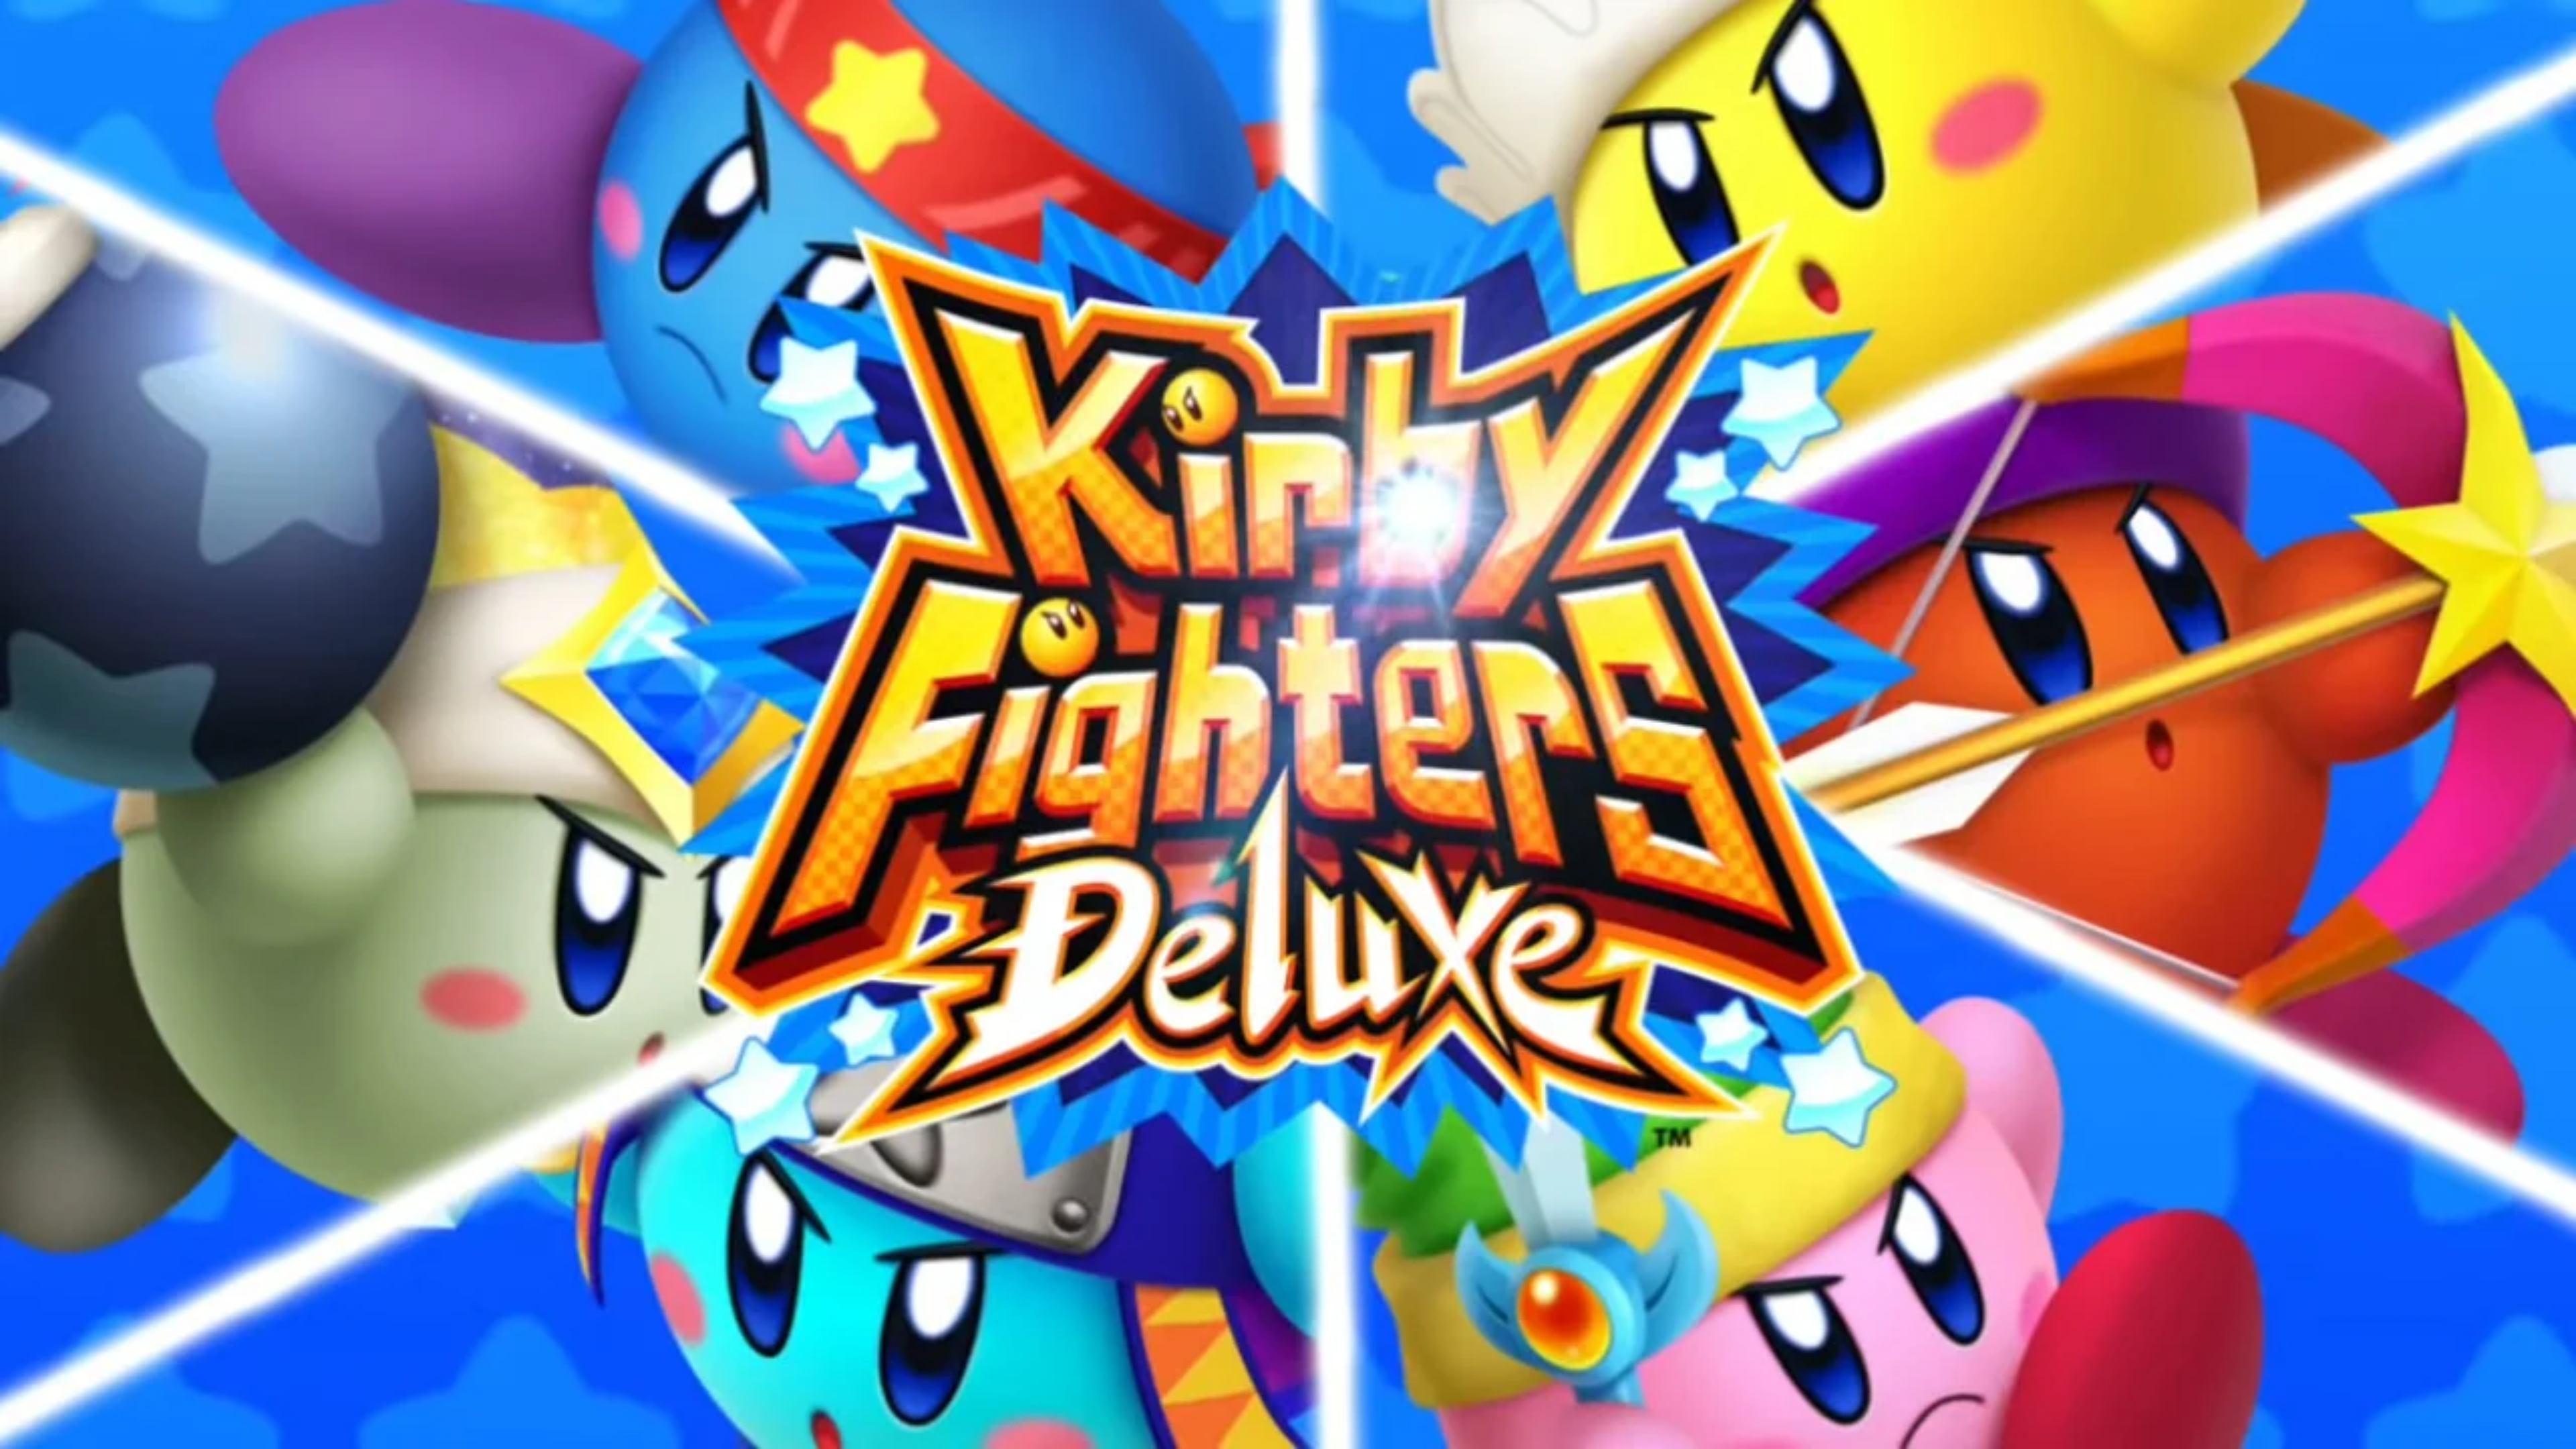 Kirby Fighters 2 for Nintendo Switch Accidentally Leaked - Marooners' Rock